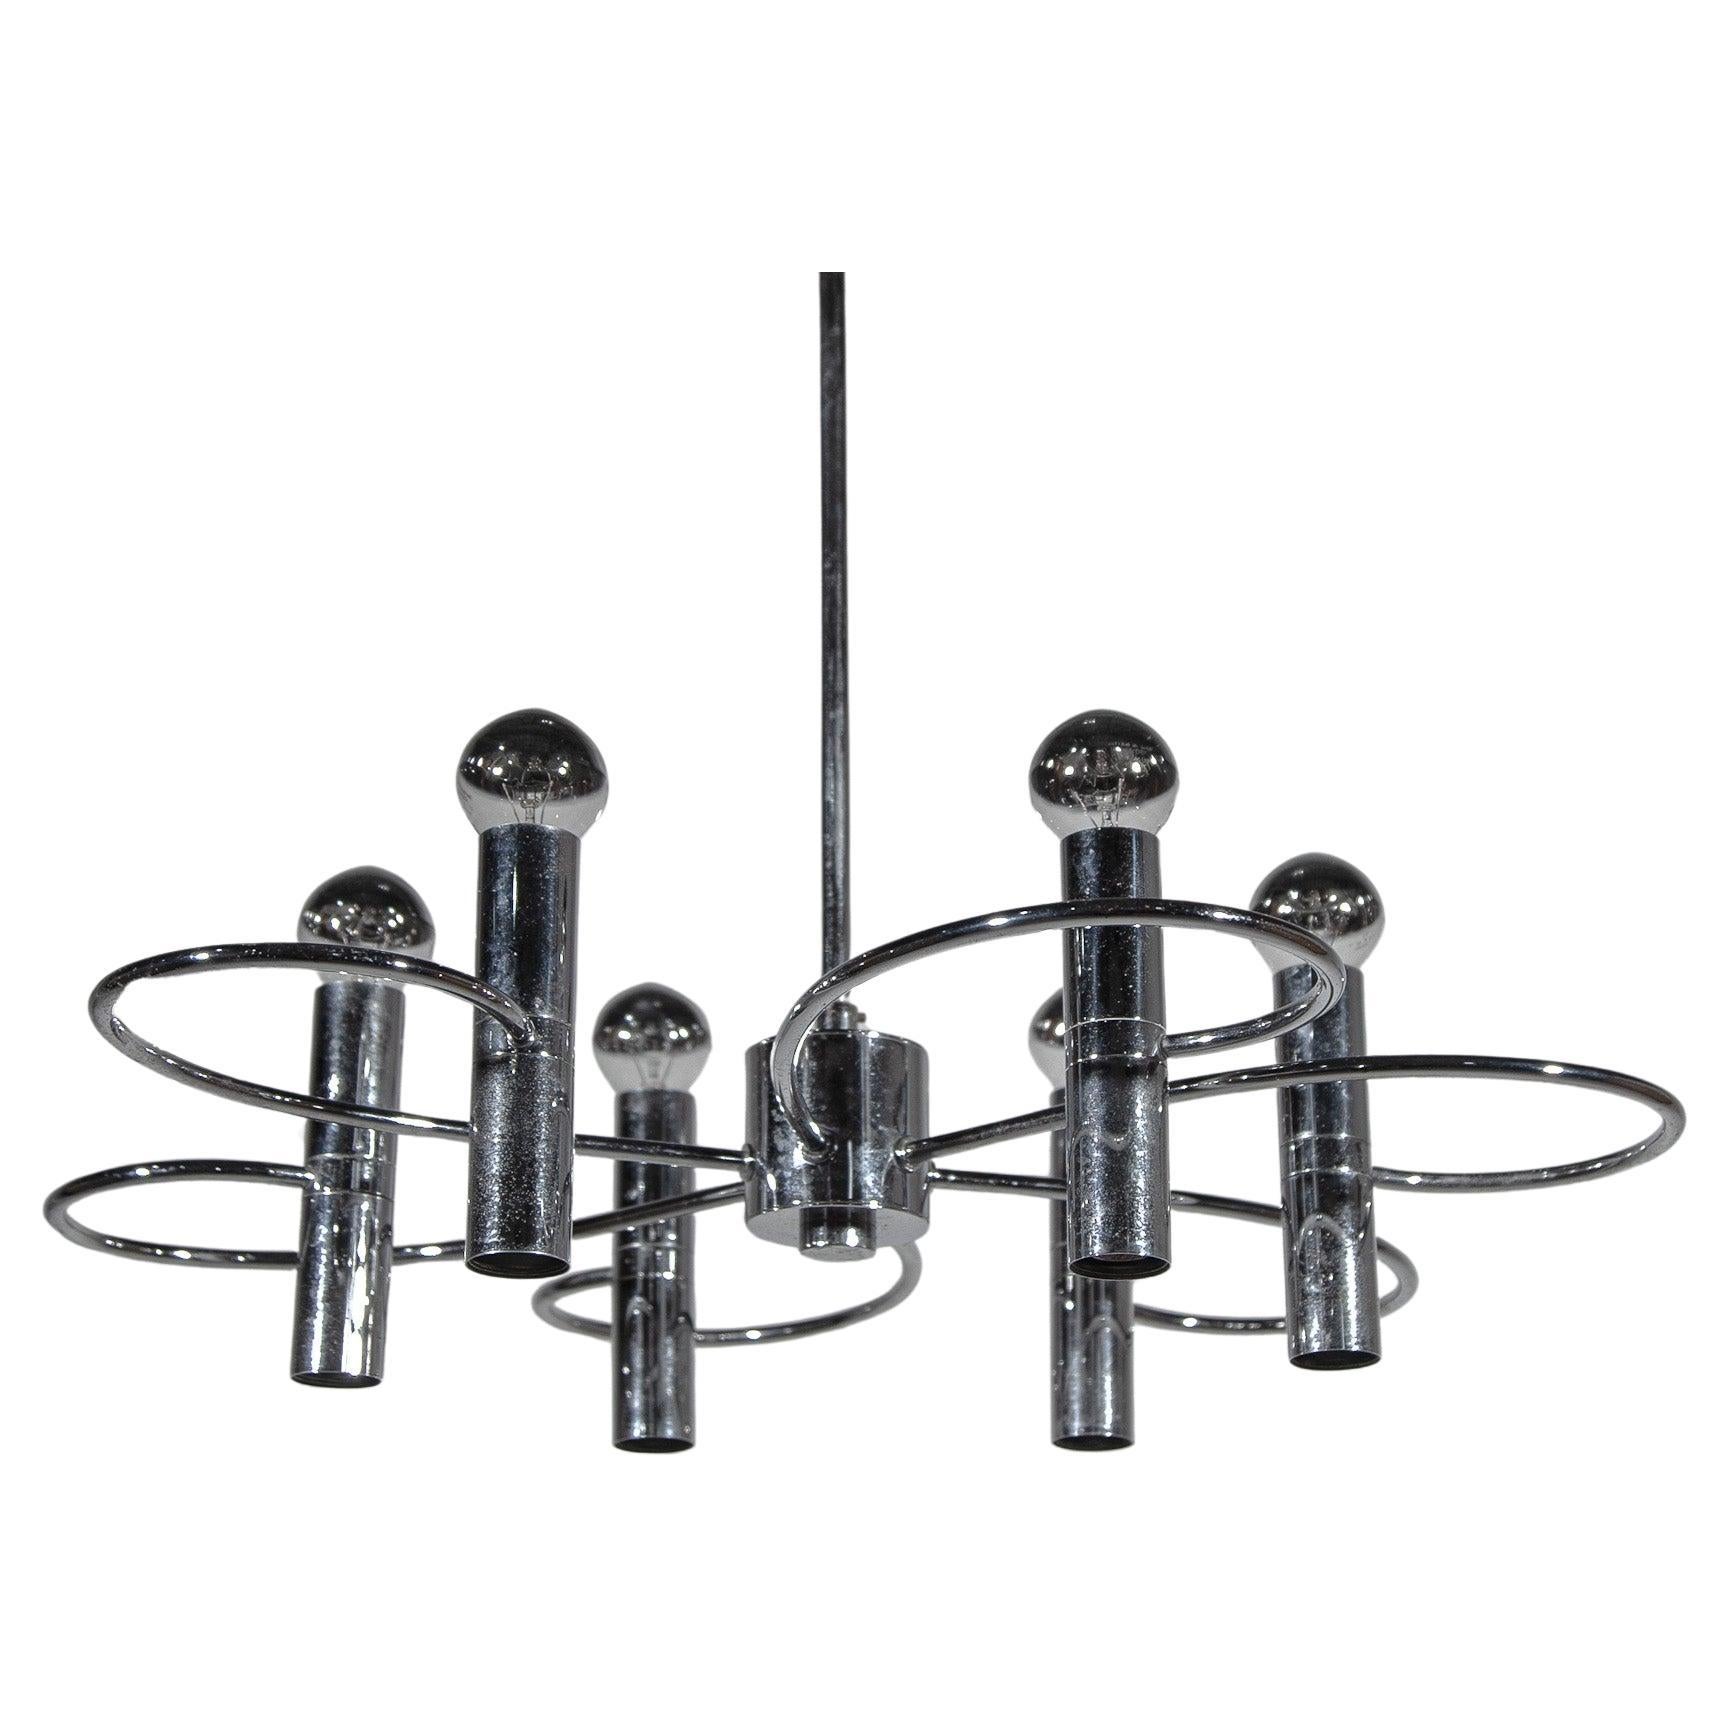 Impressive round spider ceiling lamp, chrome metal designed by Sciolari, Italy with 6 bulbs.
Also a set of two wall lights available.

The lamp has been carefully cleaned and checked by our technical team.

